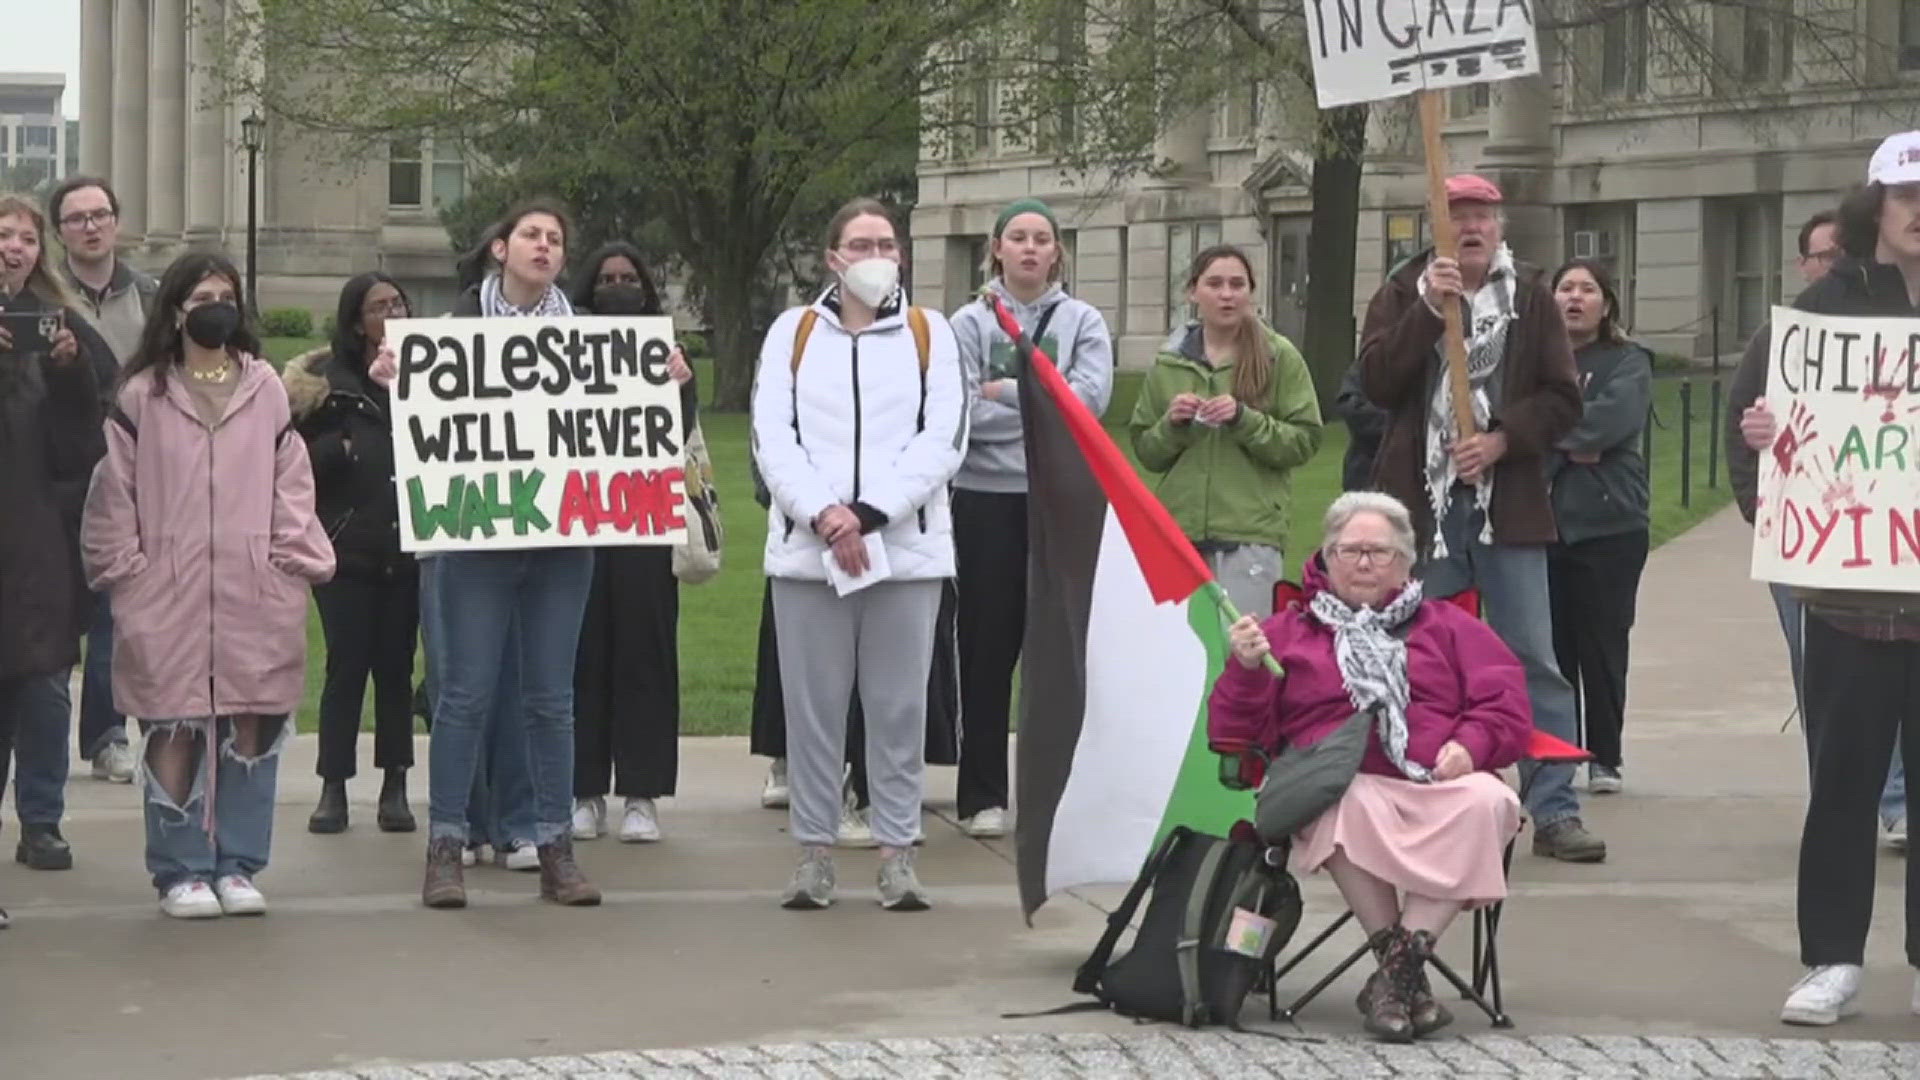 Protestors with the "Iowans for Palestine" and "Veterans for Peace" held a campus protest in Iowa City Friday.